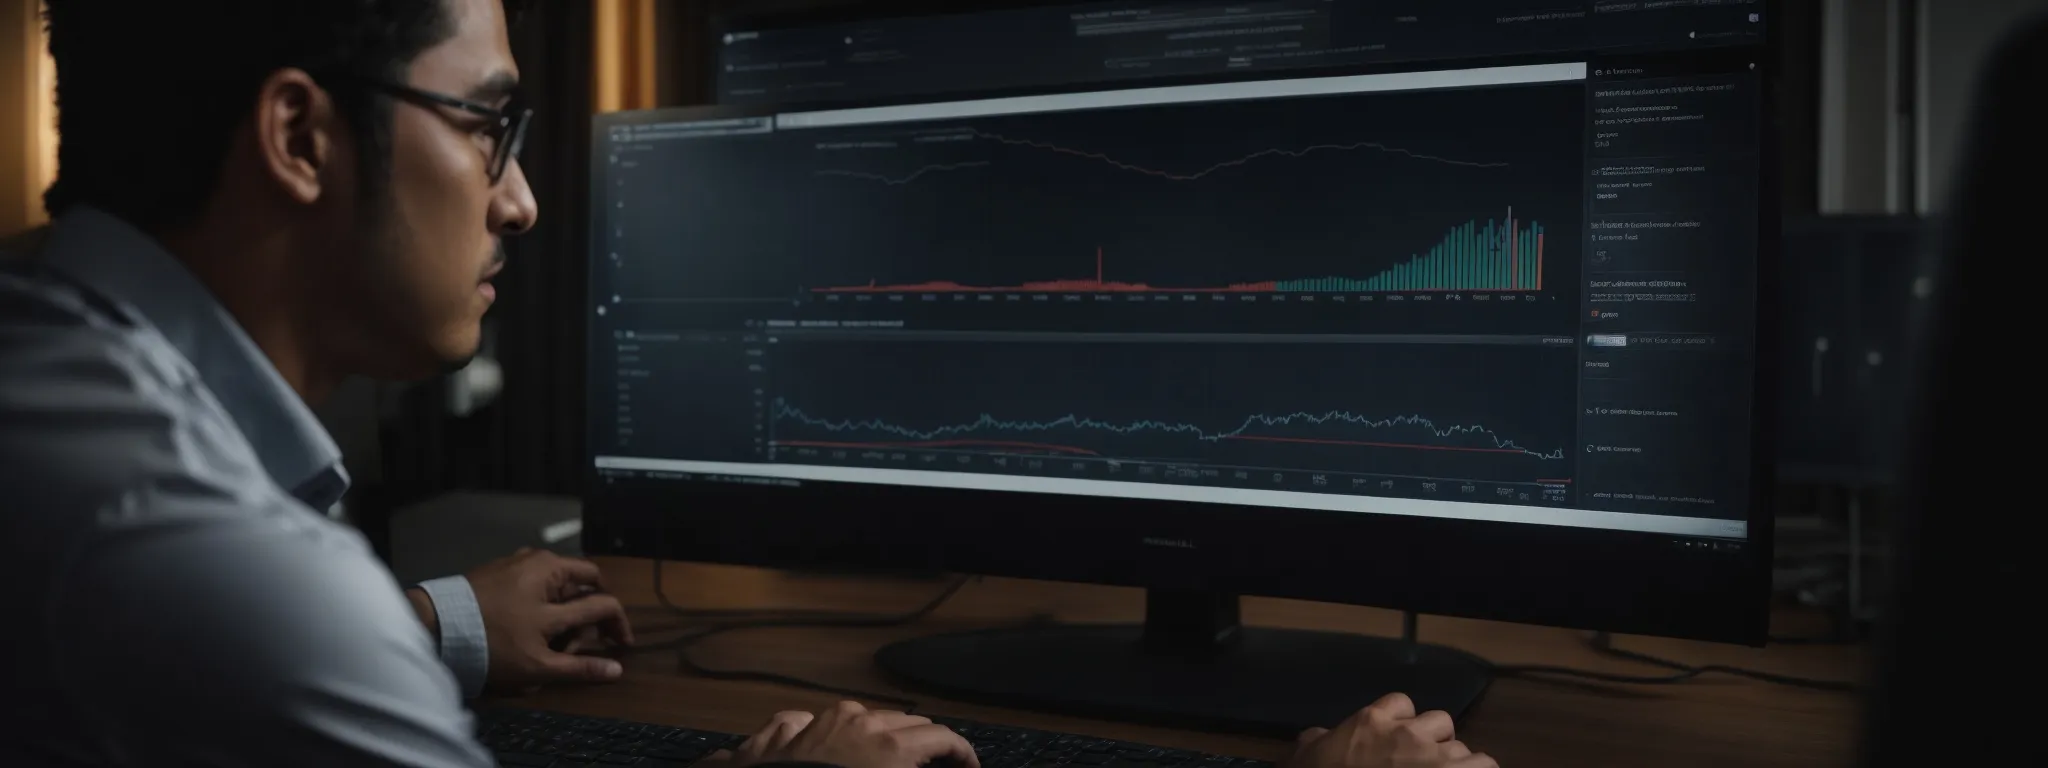 a marketer analyzing graphs on a computer screen, illustrating the performance metrics of ppc campaigns.